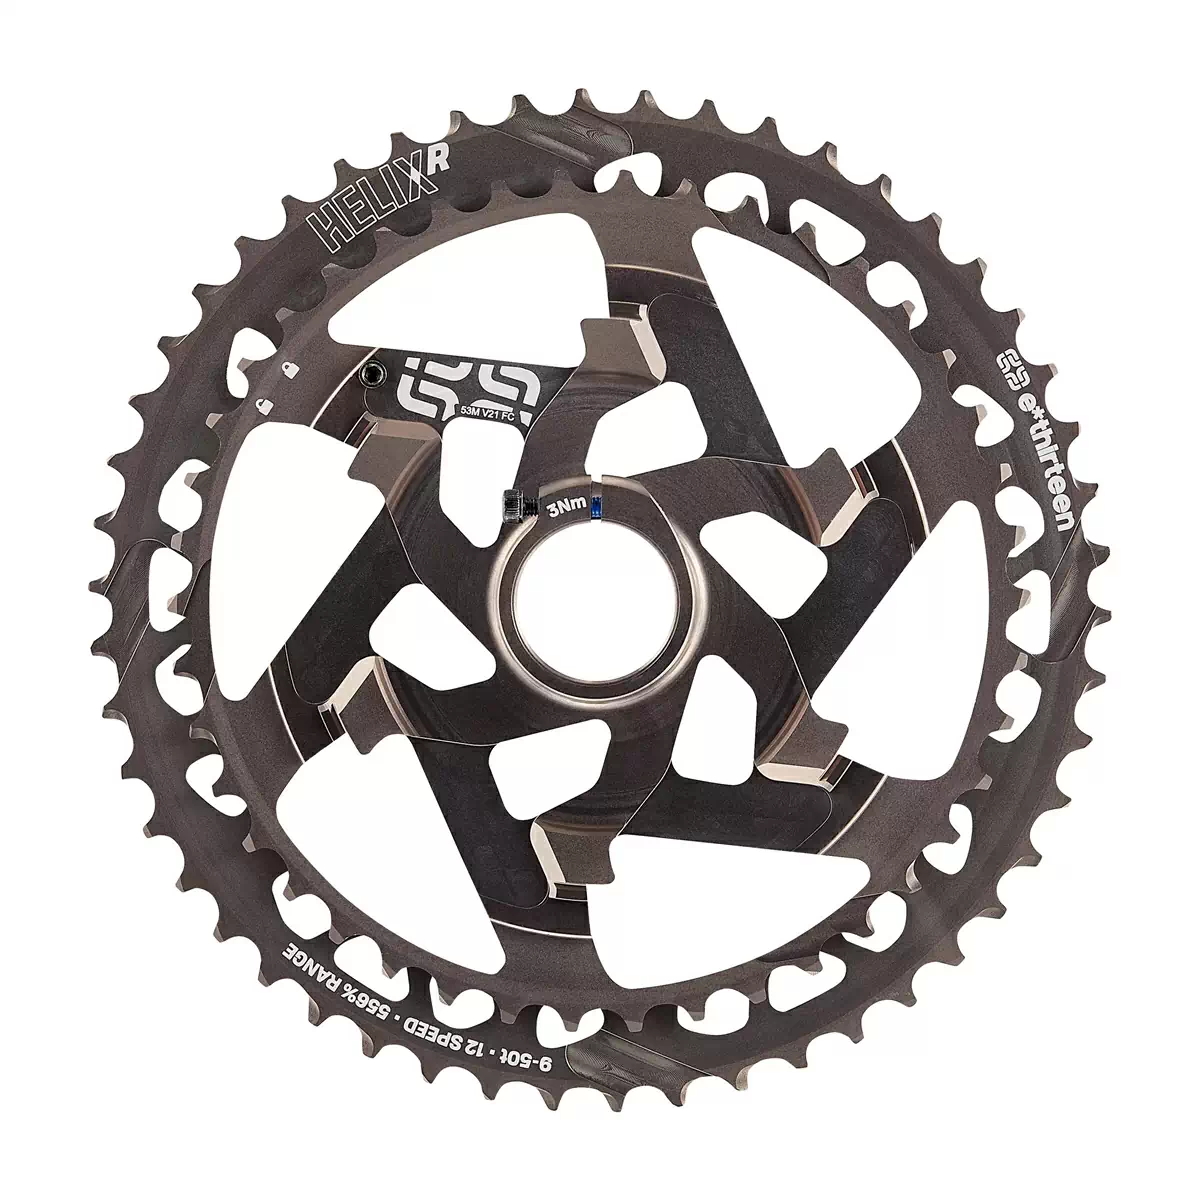 Helix Race 12s Cassette Replacement Cluster 42-50T SRAM XD/XDR Grey - image